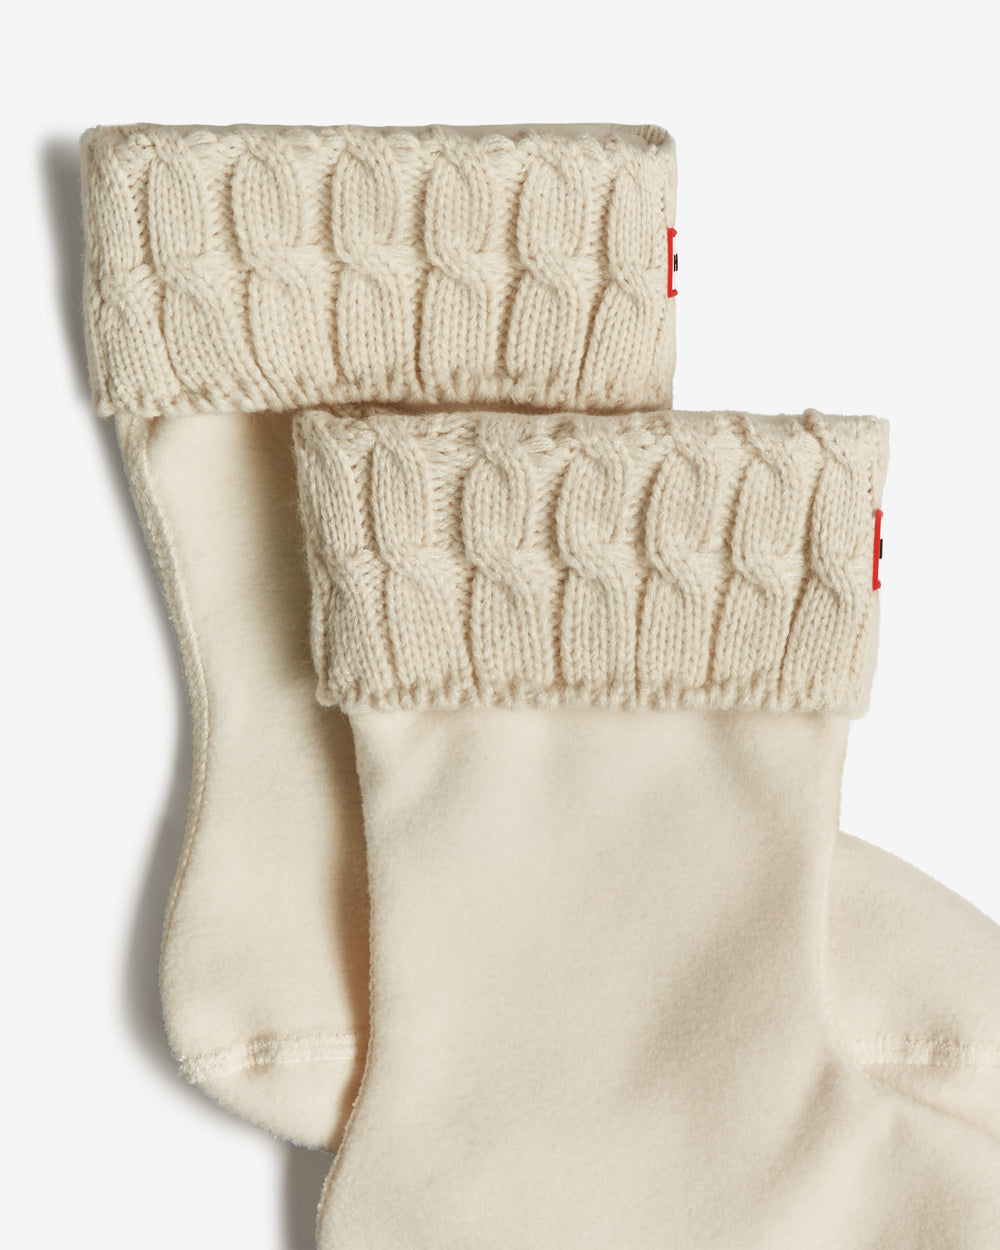 Recycled 6 Stitch Cable Cuff Short Boot Socks